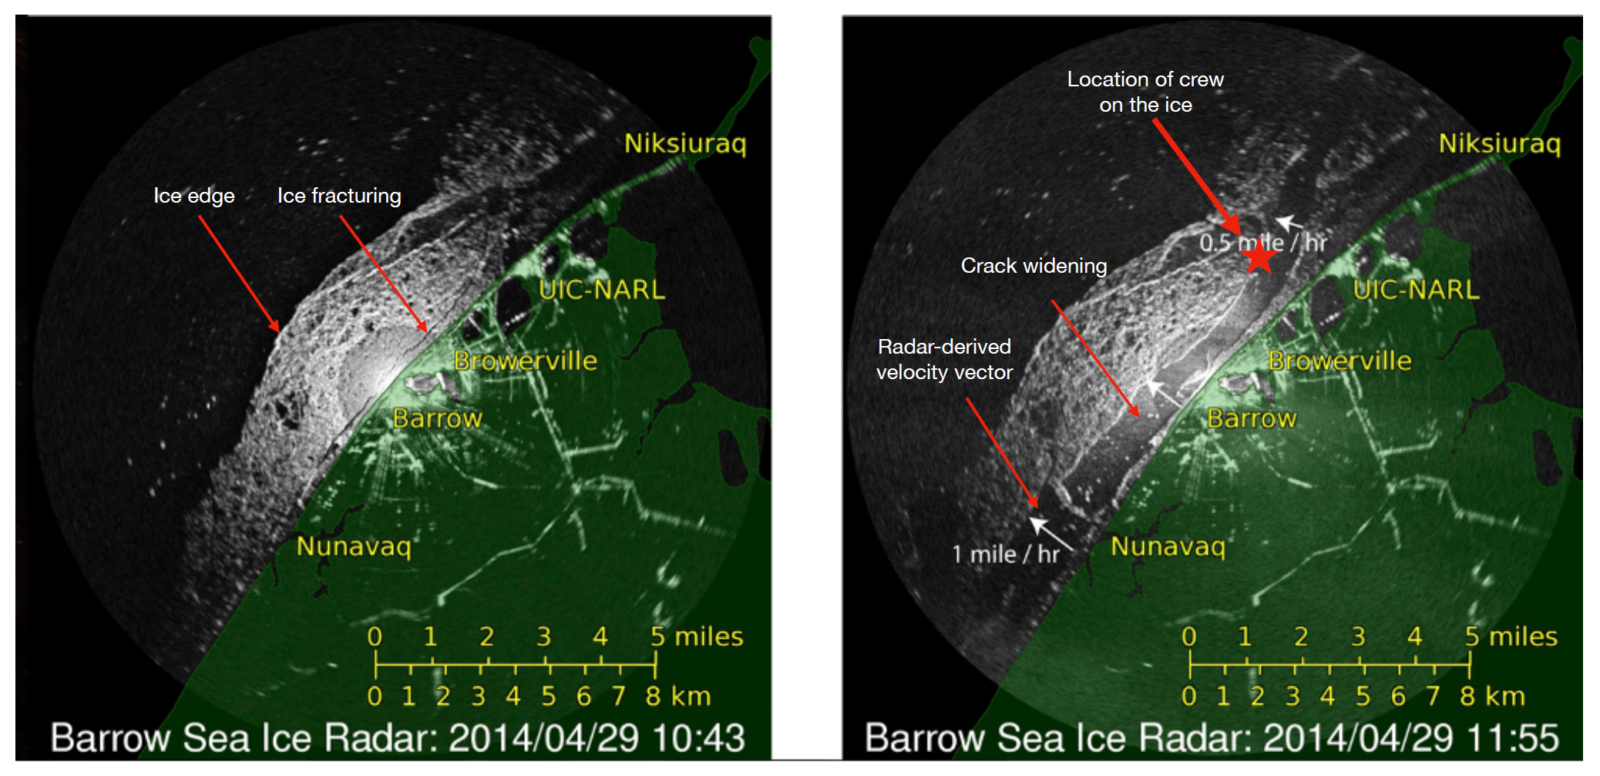 Two radar images depicting the sea ice before and after the breakoff event and a star indicating the location of people who broke off with the ice sheet